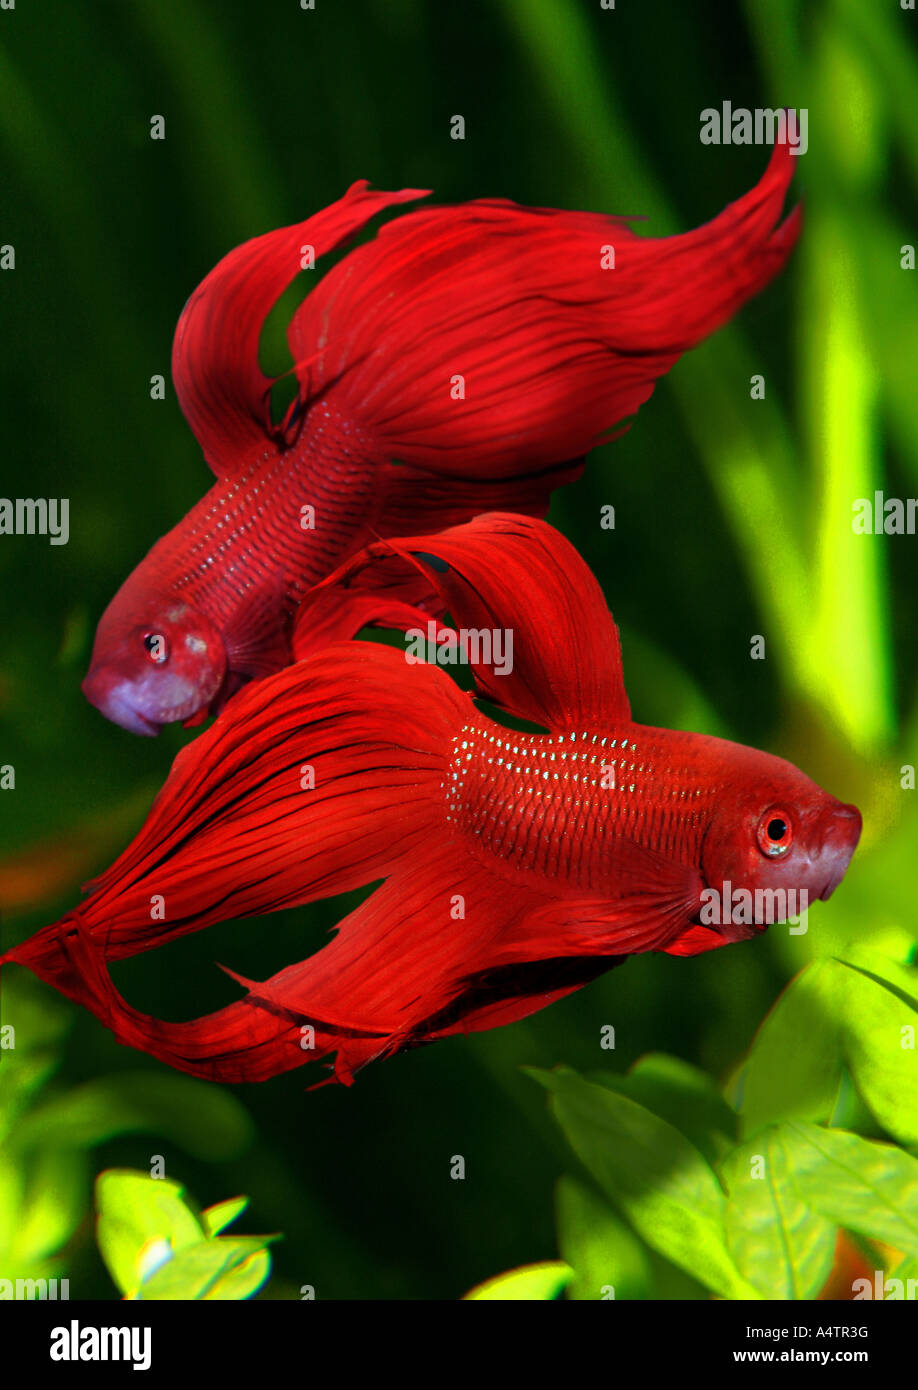 two fighting fishes / Betta Stock Photo